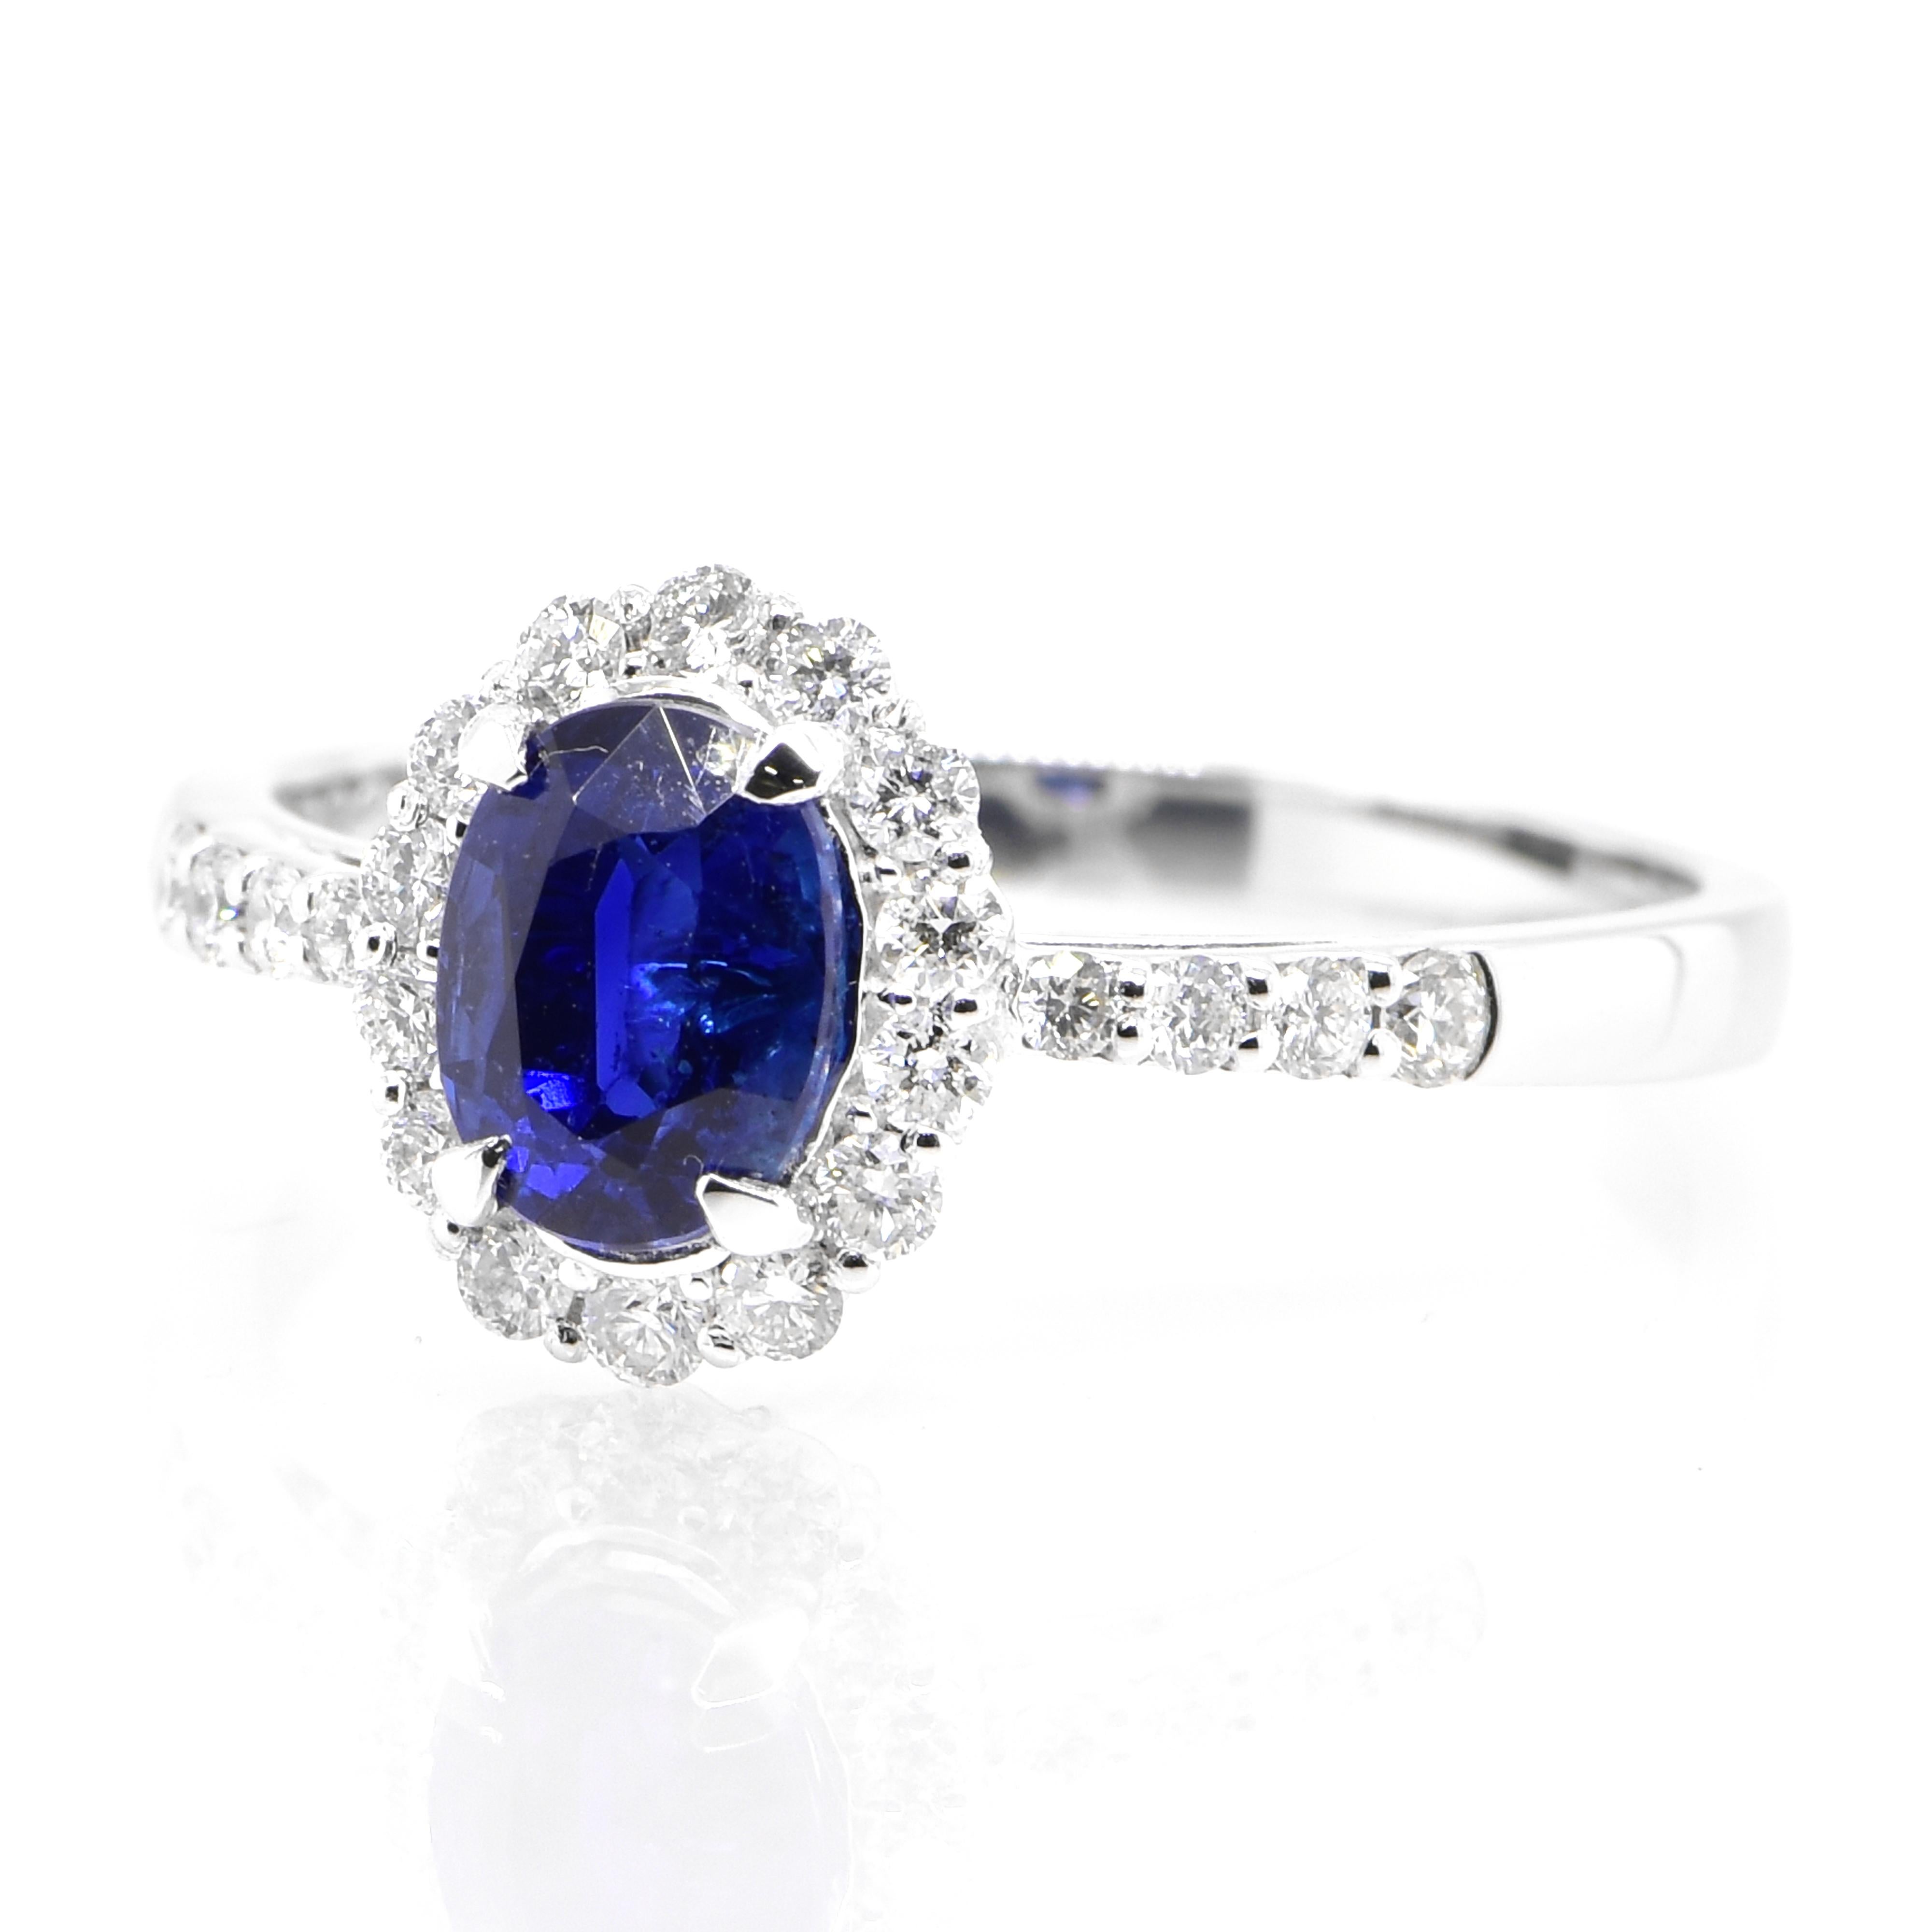 A beautiful ring featuring AIGS Certified 1.07 Carat Natural Royal Blue, Unheated Sapphire and 0.29 Carats Diamond Accents set in Platinum. Sapphires have extraordinary durability - they excel in hardness as well as toughness and durability making